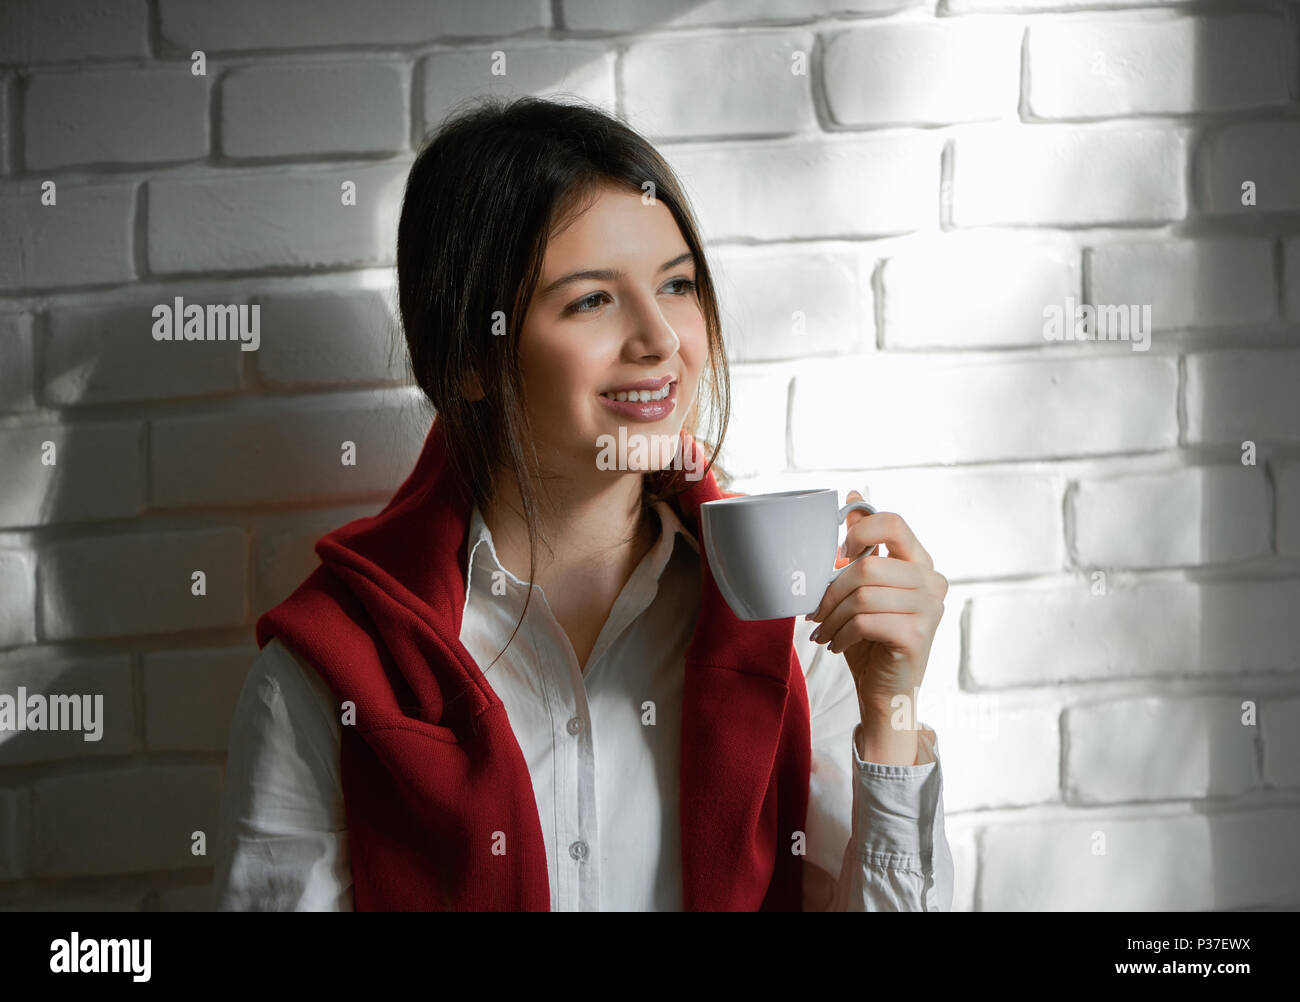 Pretty smiling student drinking coffee in the morning. Having short black hair and light day make up. Wearing casual white shirt and red cardigan. Feeling good, happy. White wall background. Stock Photo